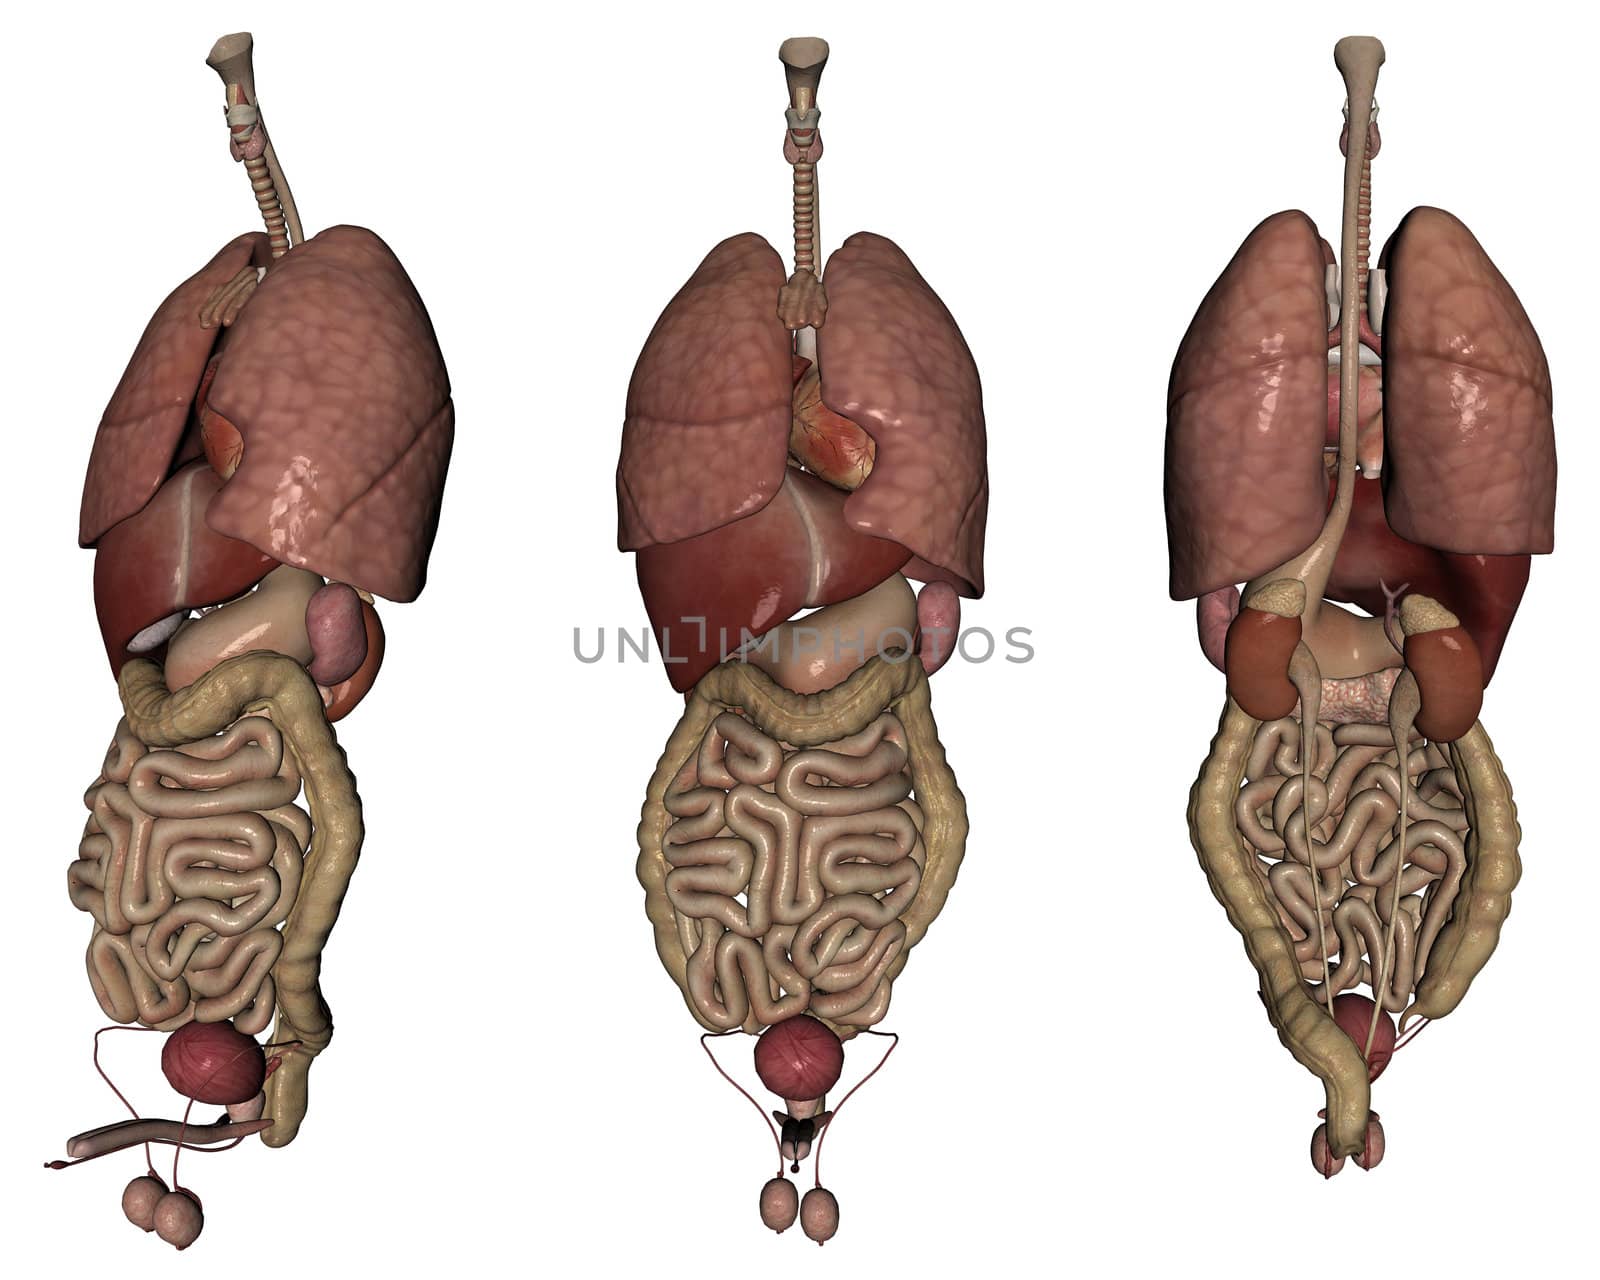 3D rendered human organs on white background isolated